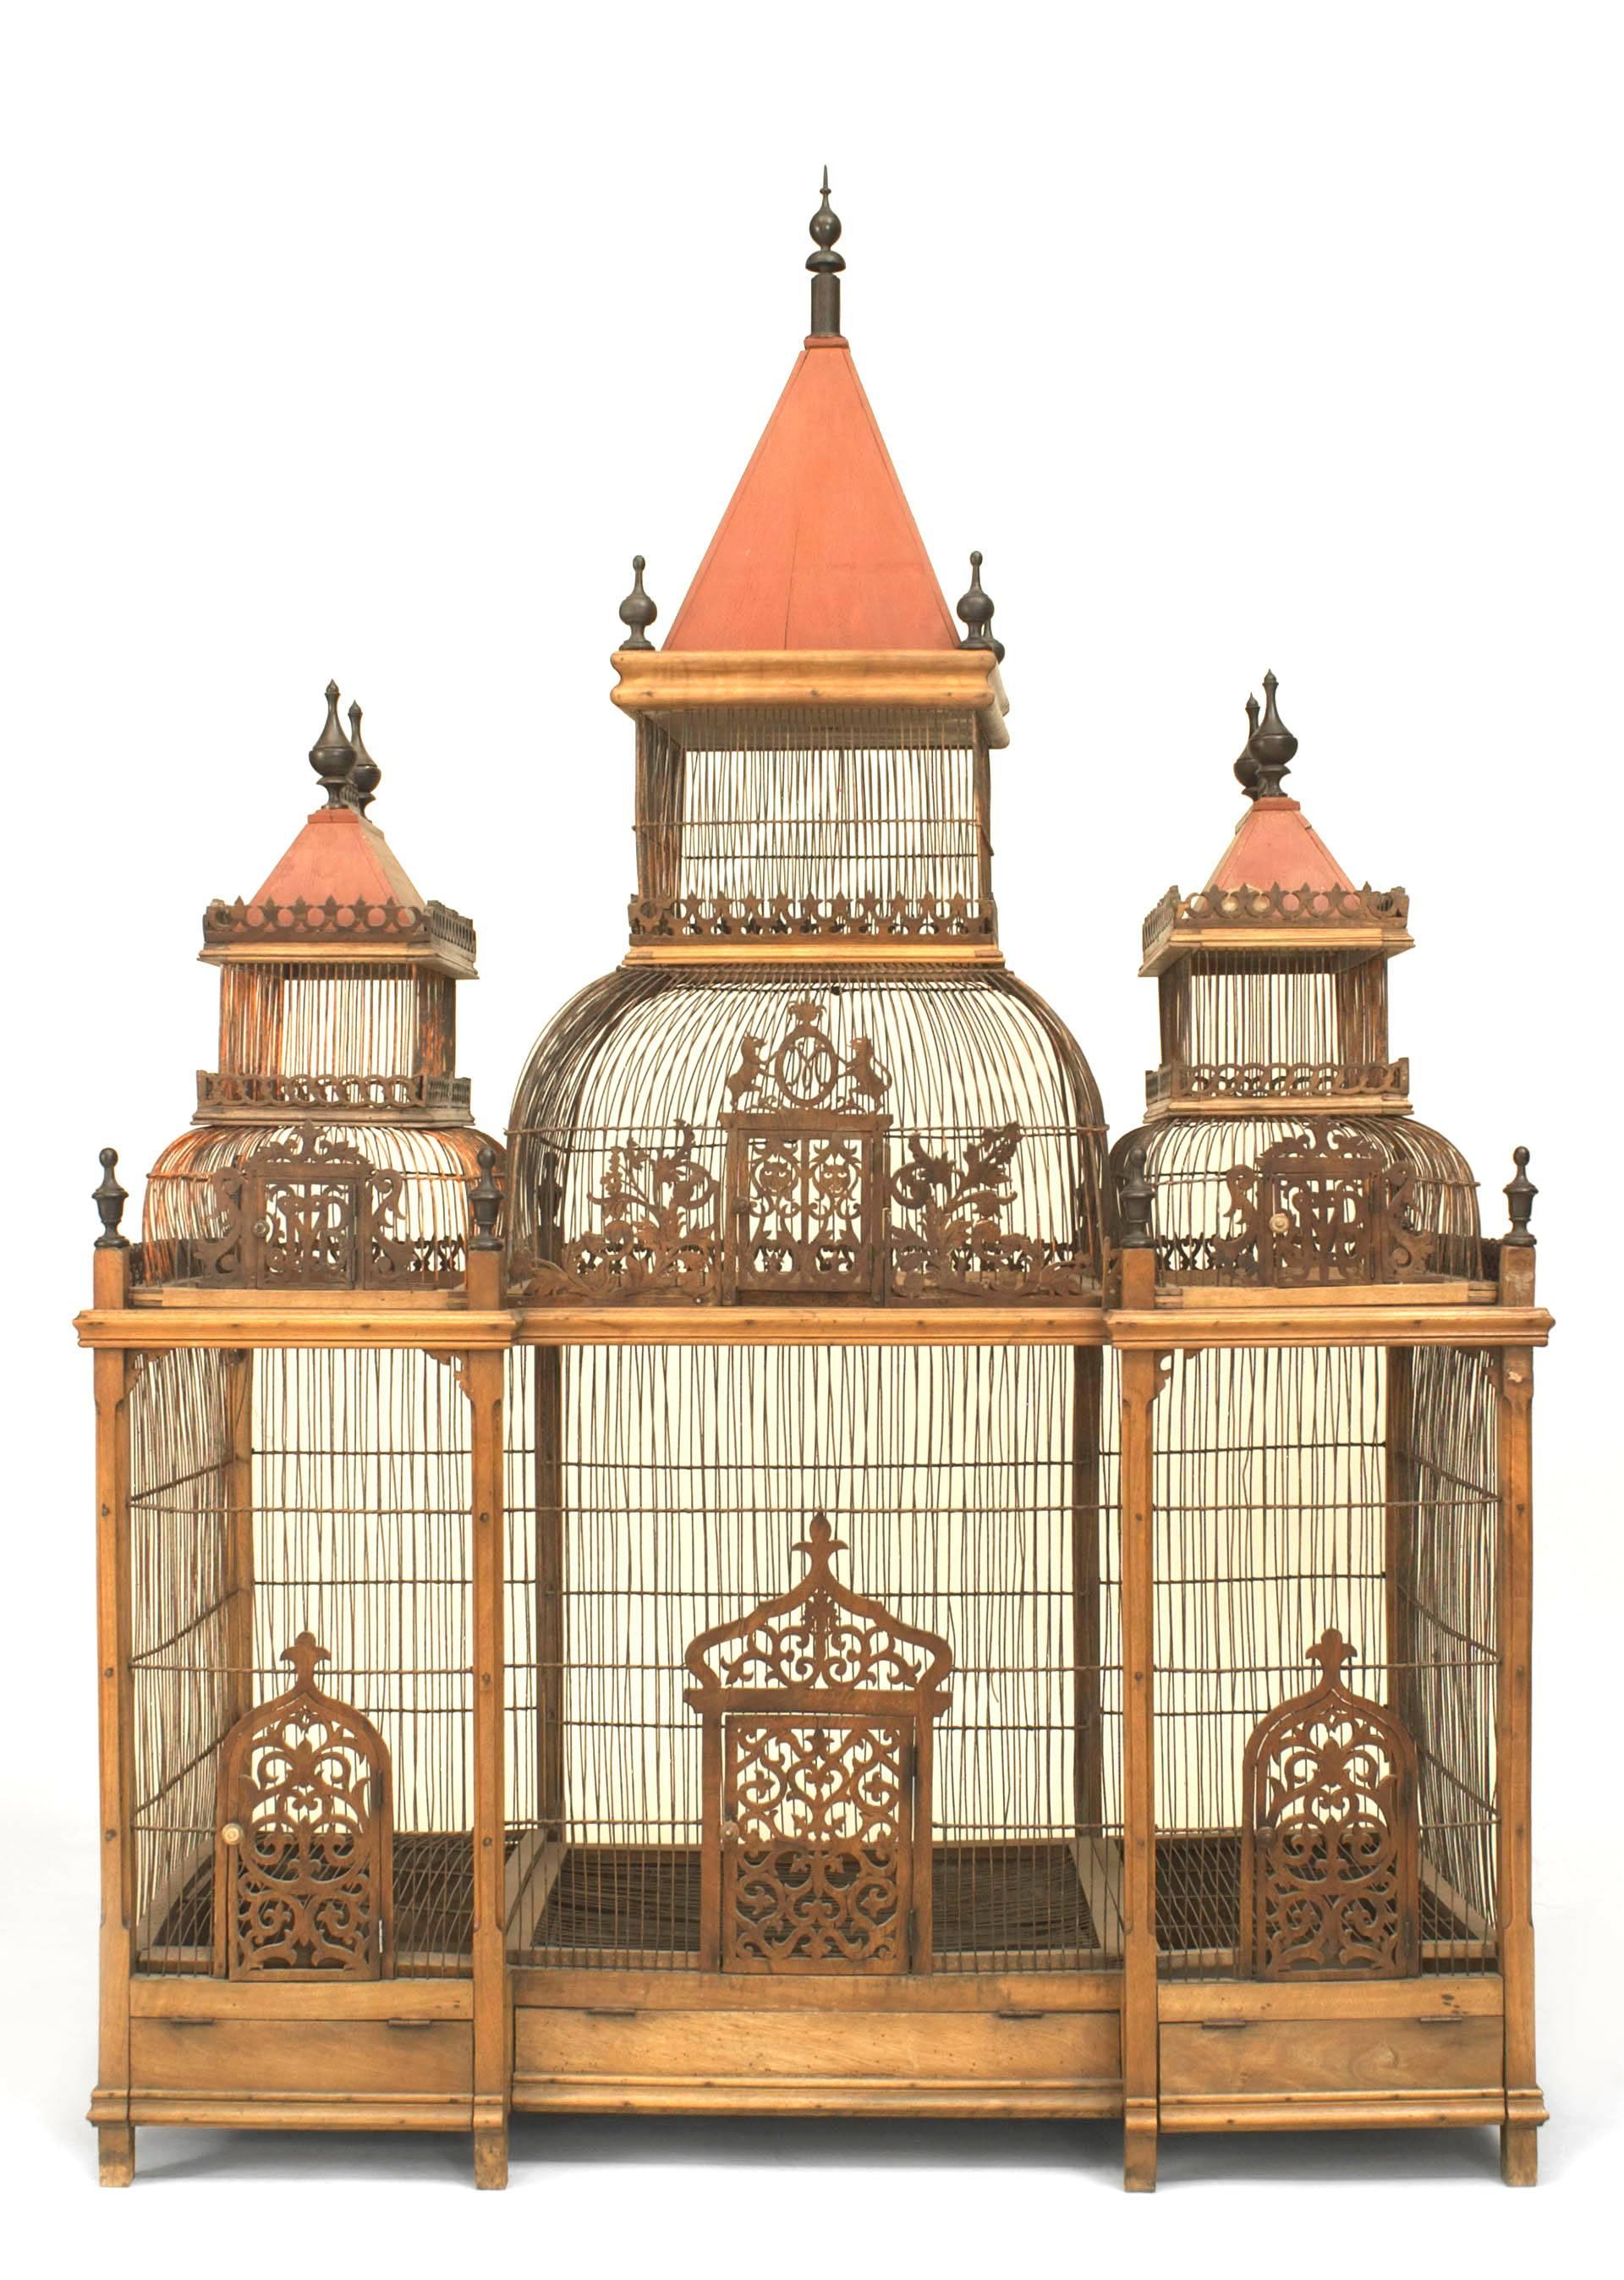 French Victorian style (19/20th Cent) walnut large birdcage with 3 red dome tops having ebonized finials and trimmed with filigree tracery carving.
